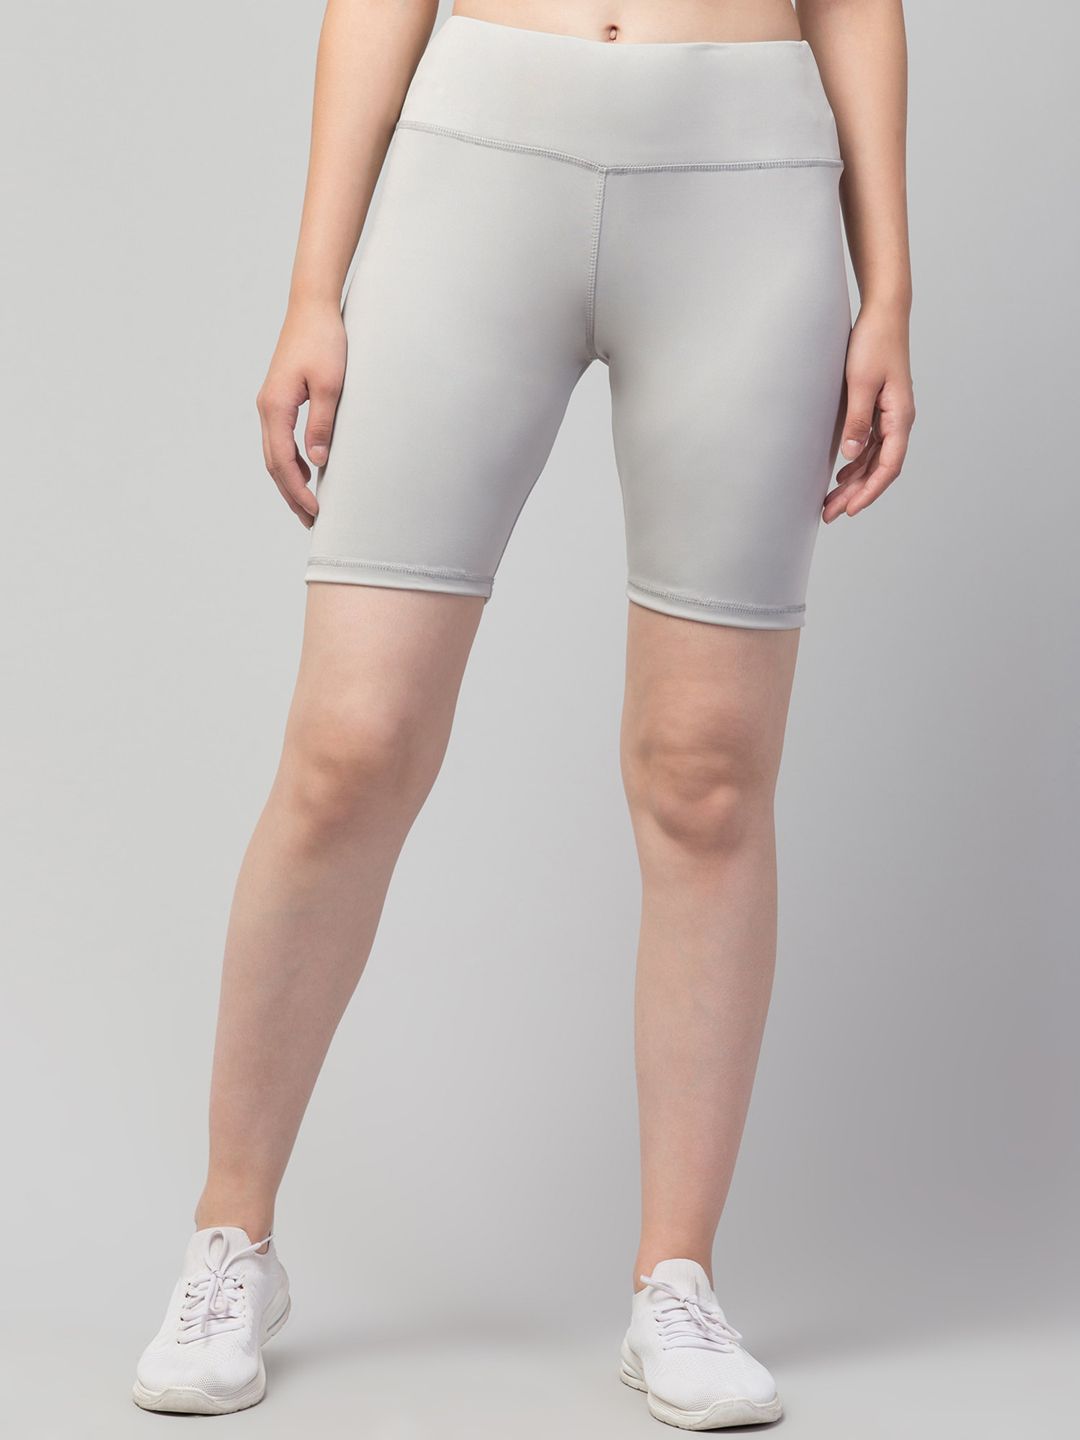 Apraa & Parma Women Grey Skinny Fit Cycling Sports Shorts Price in India